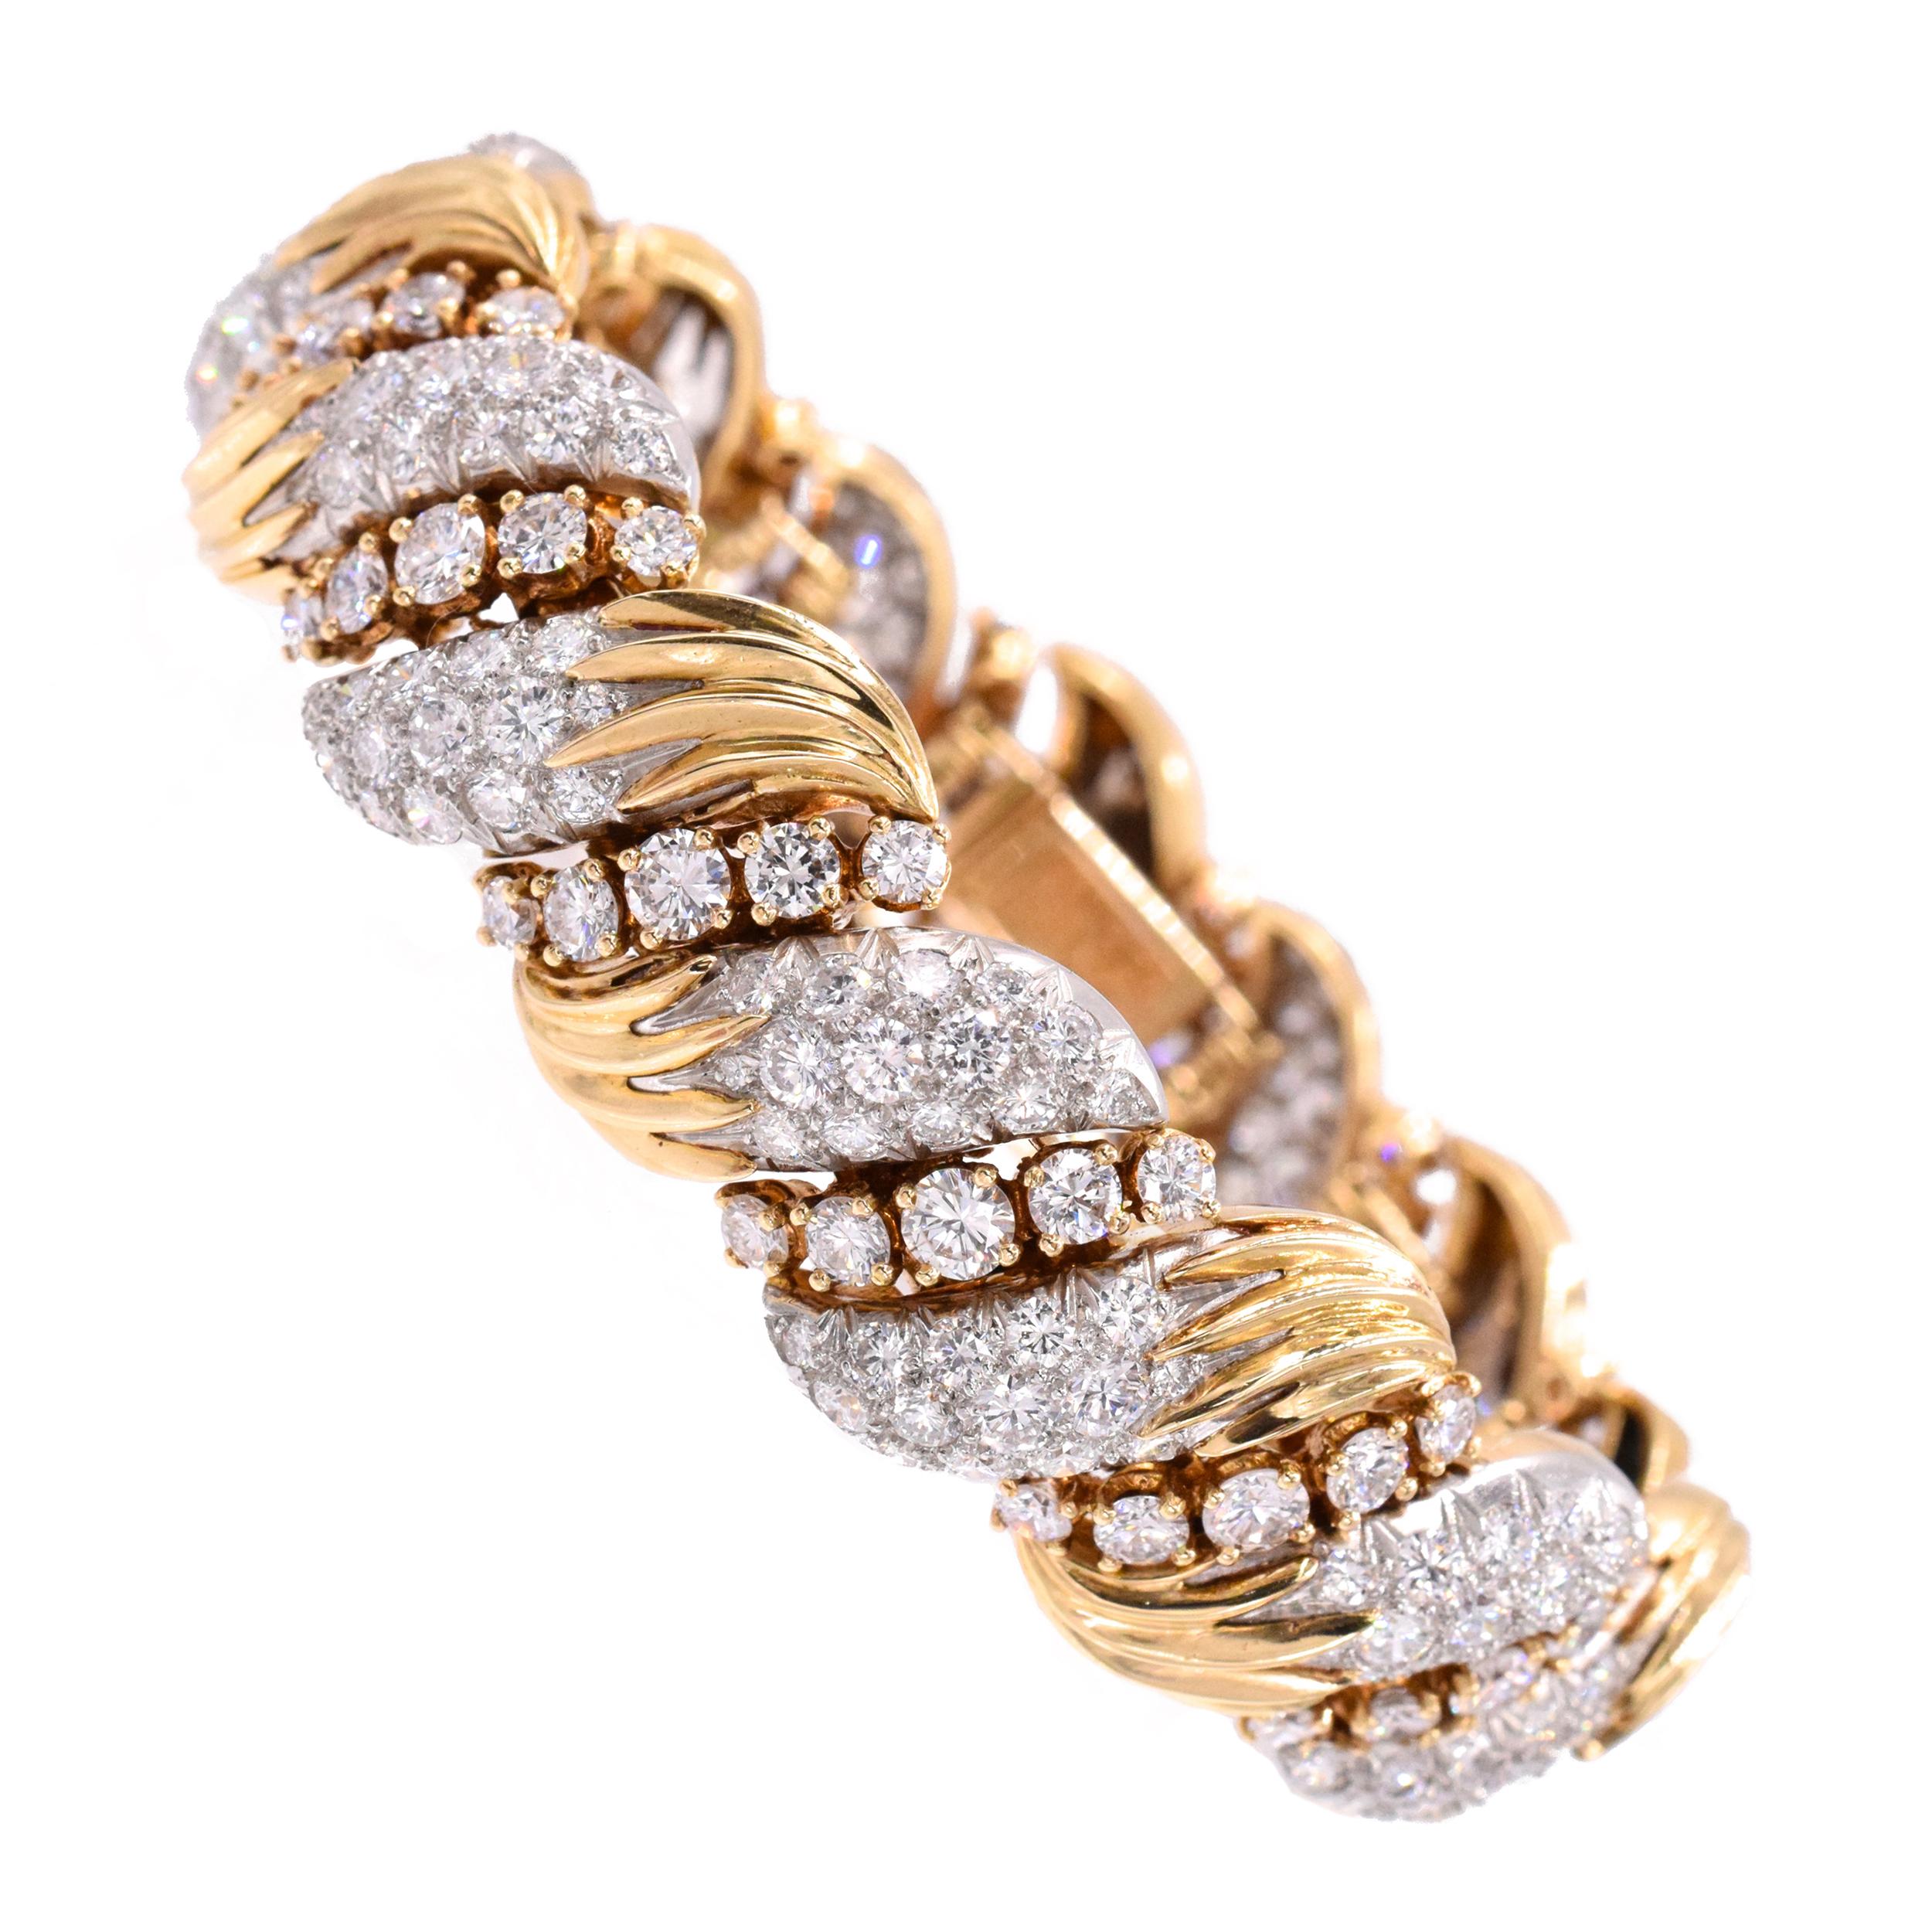 Van Cleef & Arpels diamond bracelet with circular cut diamonds with approximate weight of 16 carats
 set in platinum & 18k yellow gold.
The bracelet is 7 inches long with French hallmarks & numbered xxxx
Made in France